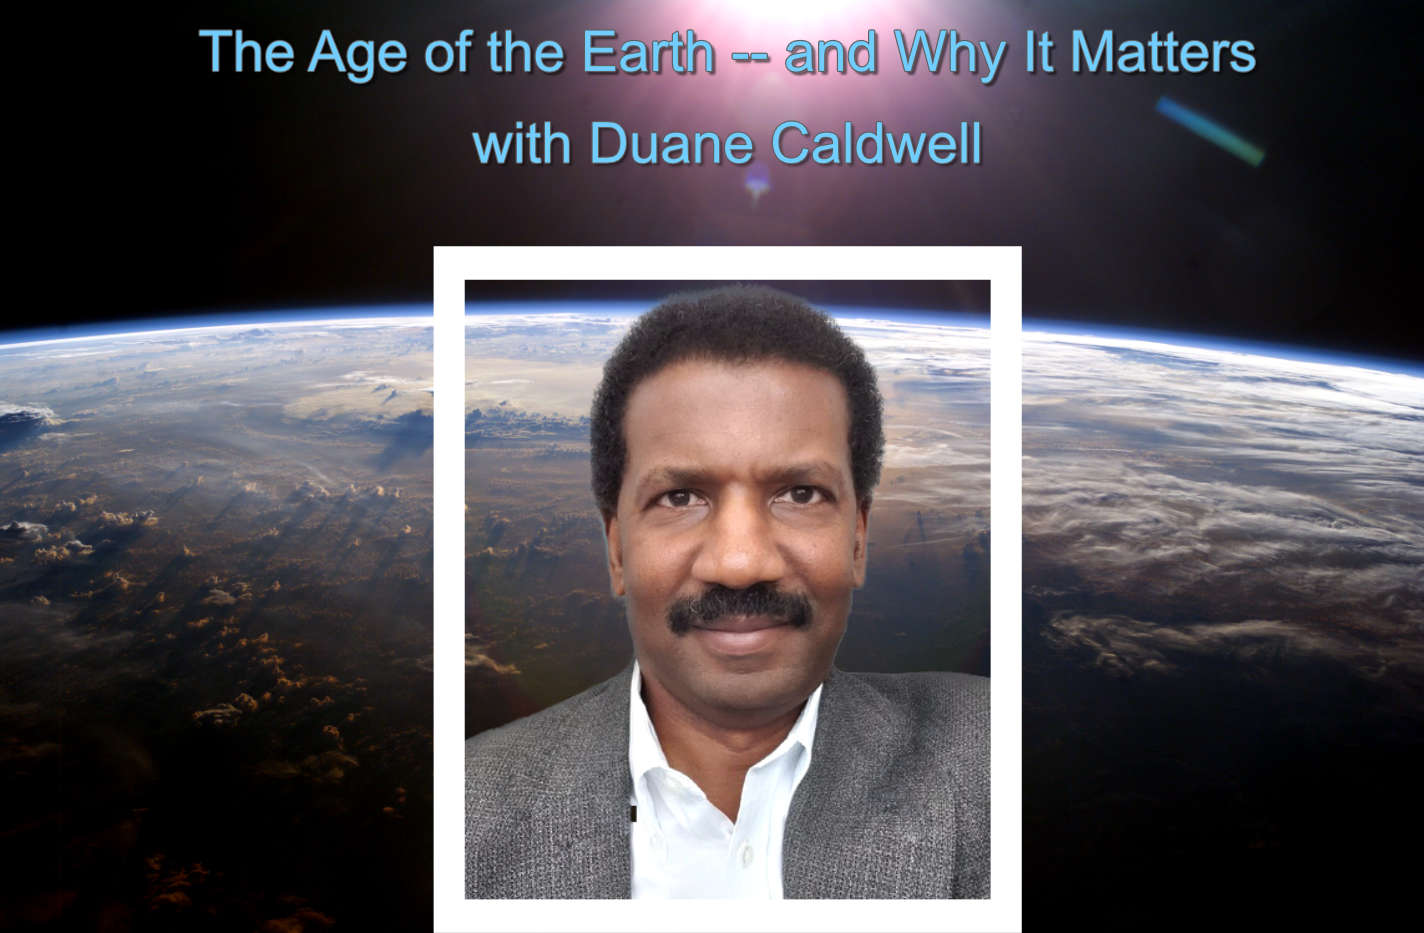 Title: The Age of the Earth -- and Why It Matters, with Duane Caldwell- Picture of the Earth from space, with Duane Caldwell's picture superimposed. Click for his bio.